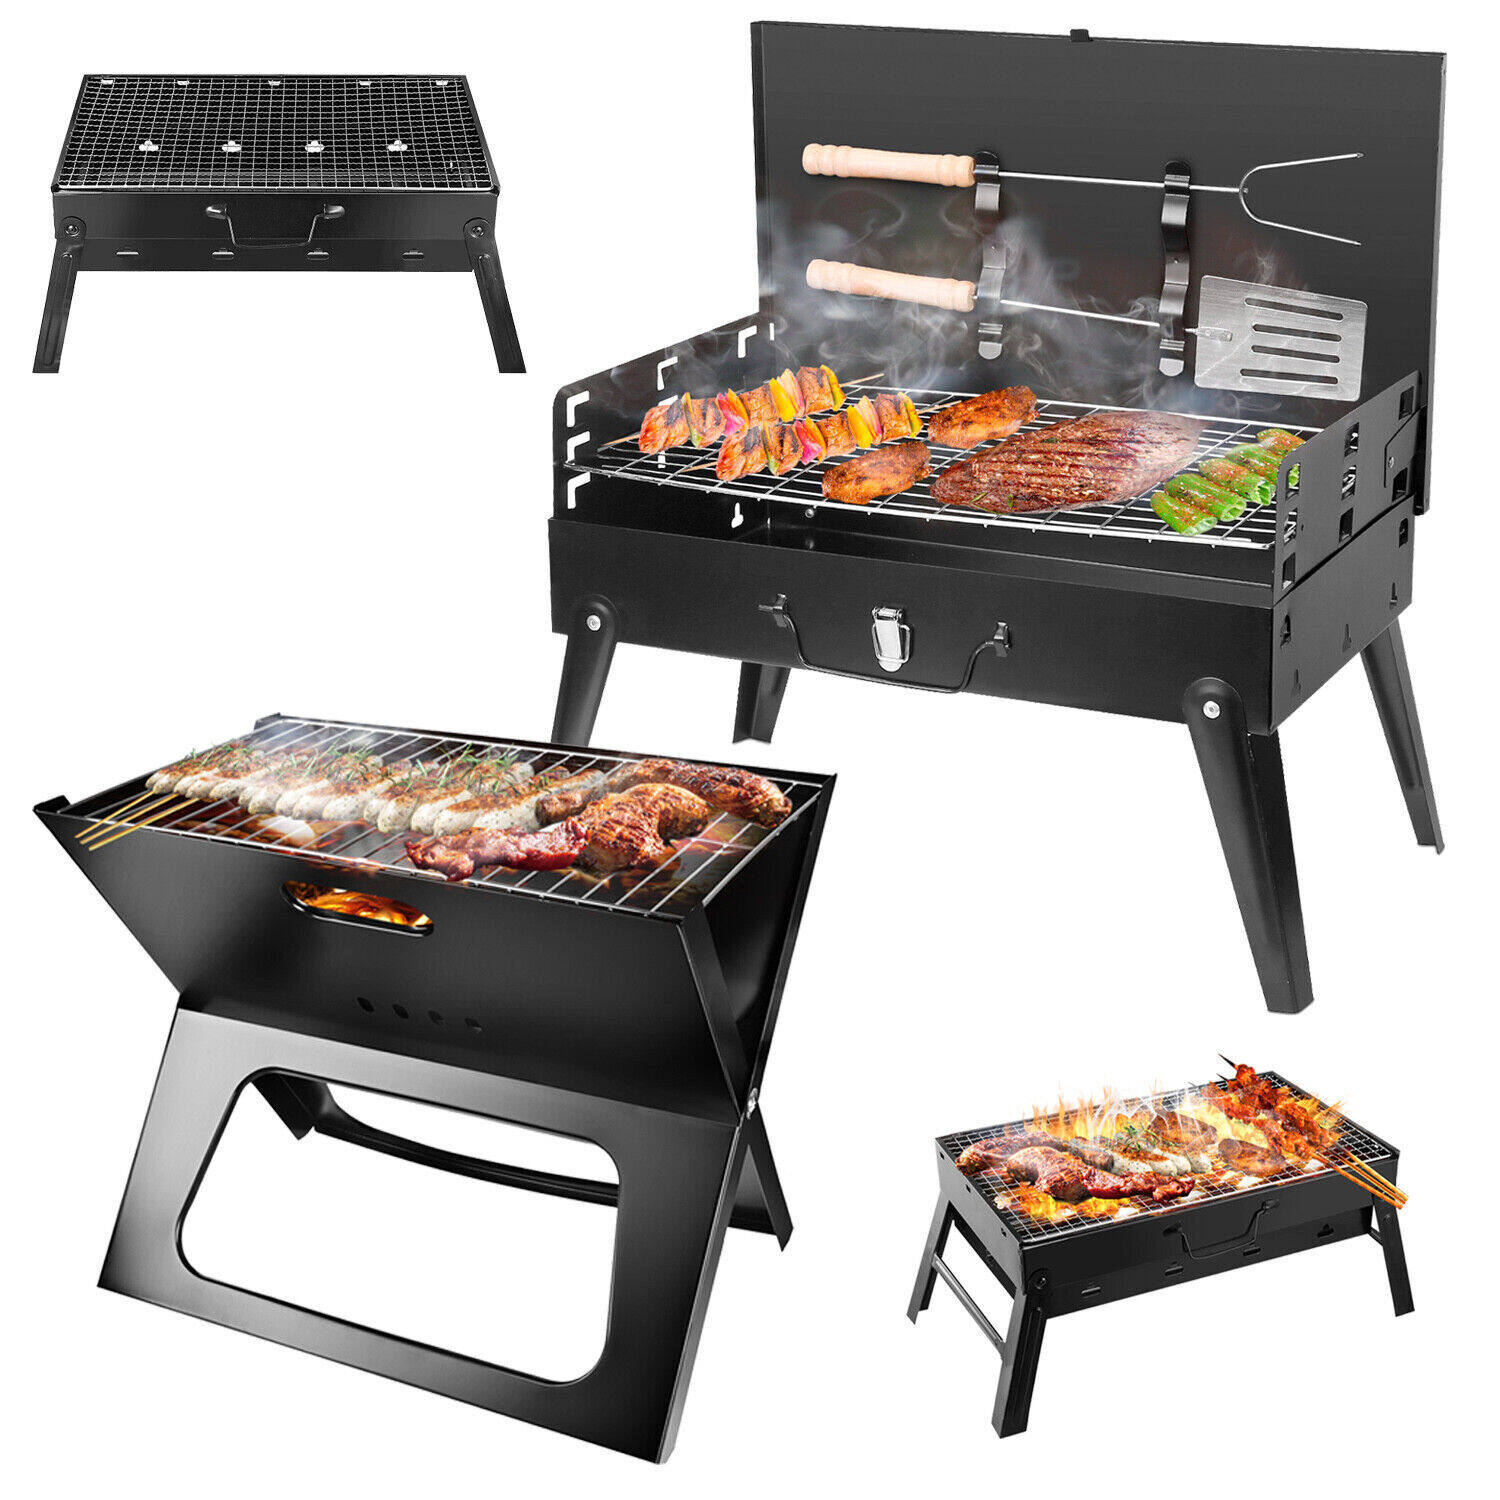 Types of Barbecue Ovens